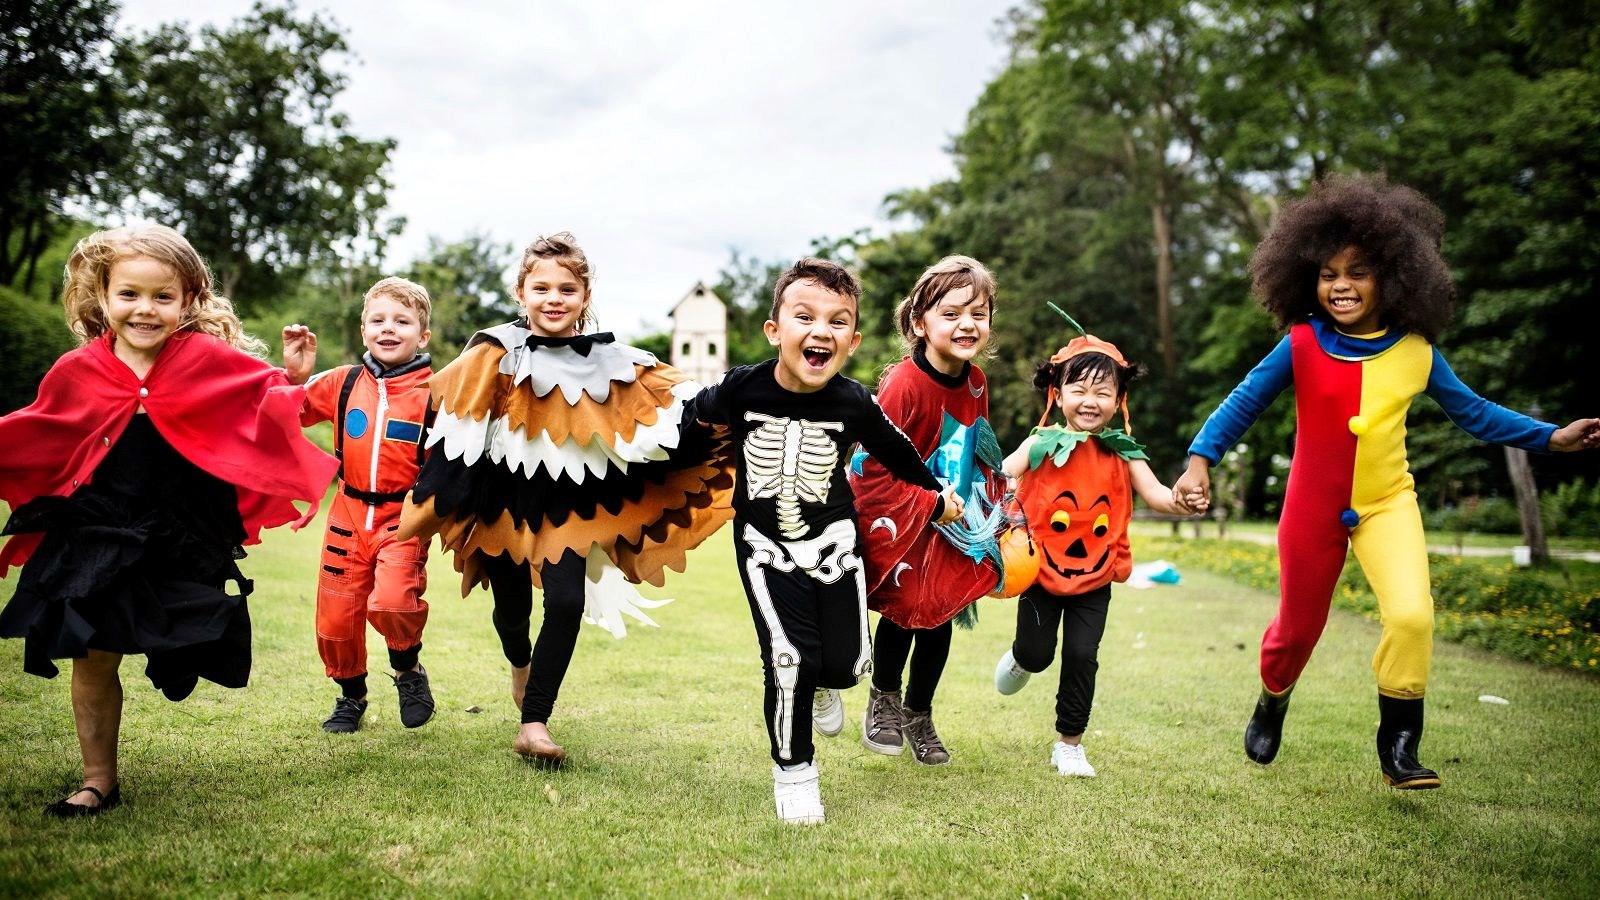 A Parent's Guide to Avoiding Offensive Halloween Costumes